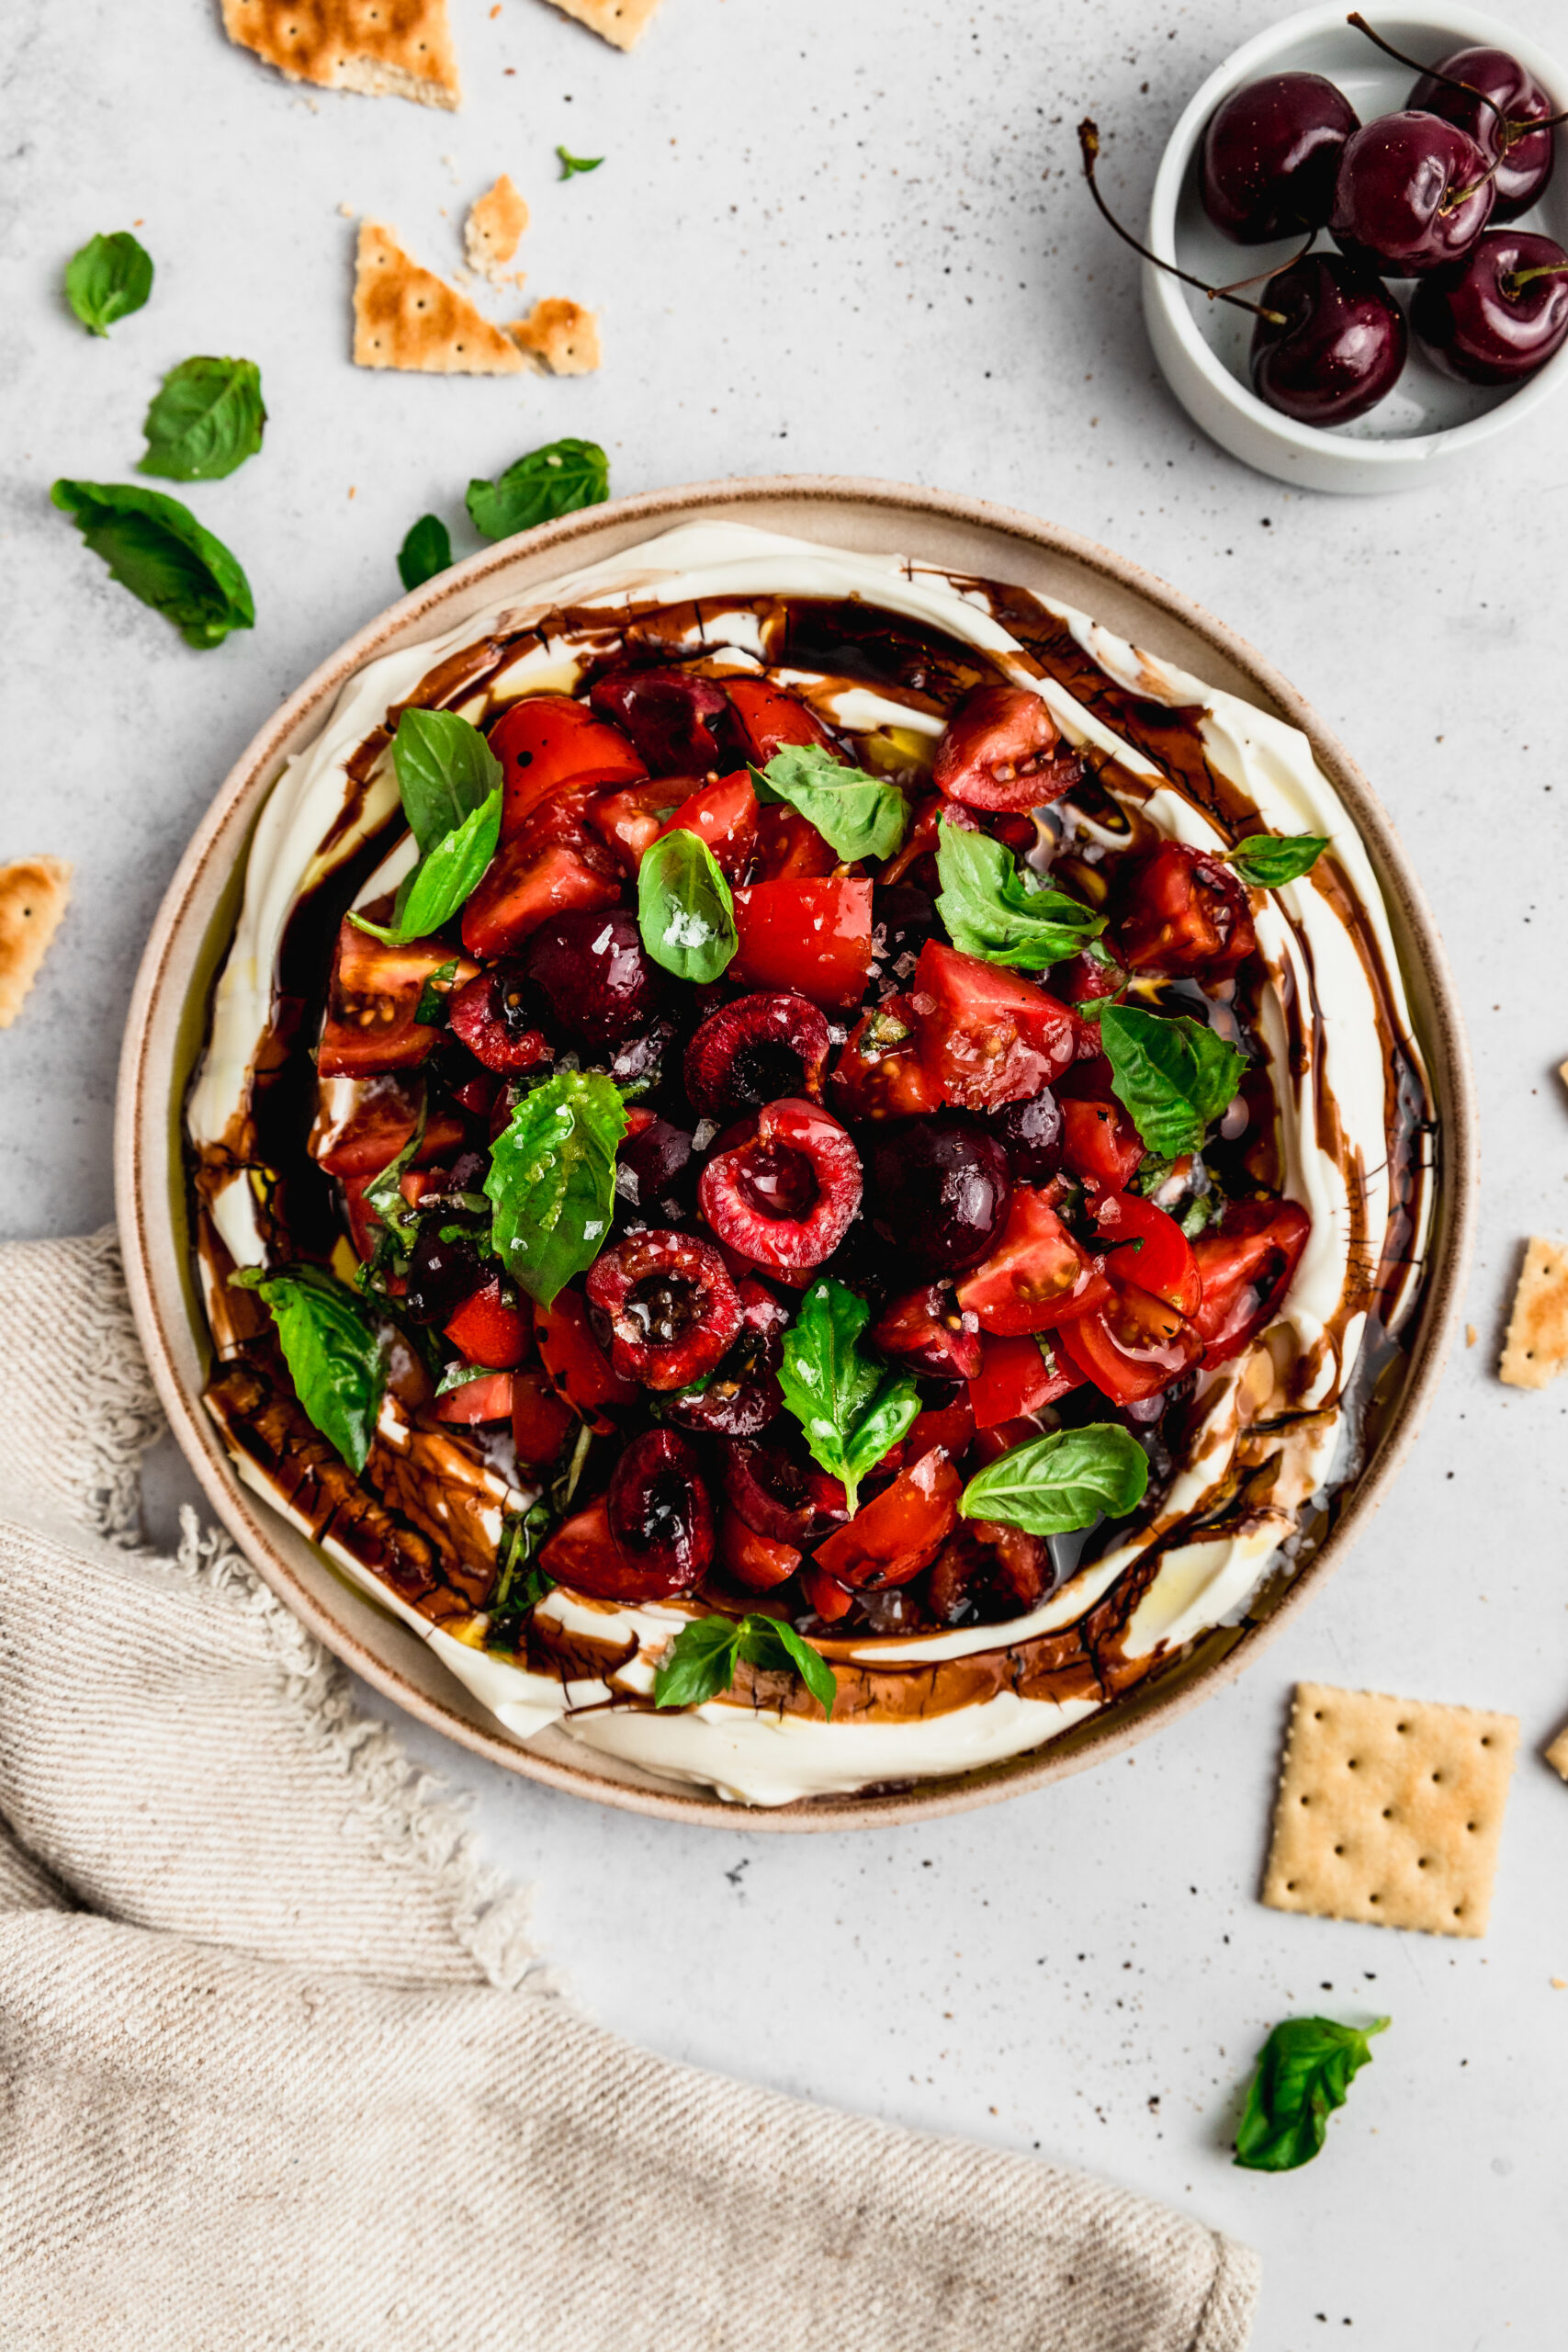 Top view of a cold caprese dip with fruit, in this case cherries. It's topped with fresh basil and finiched with a drizzle of olive oil and balsamic glaze.